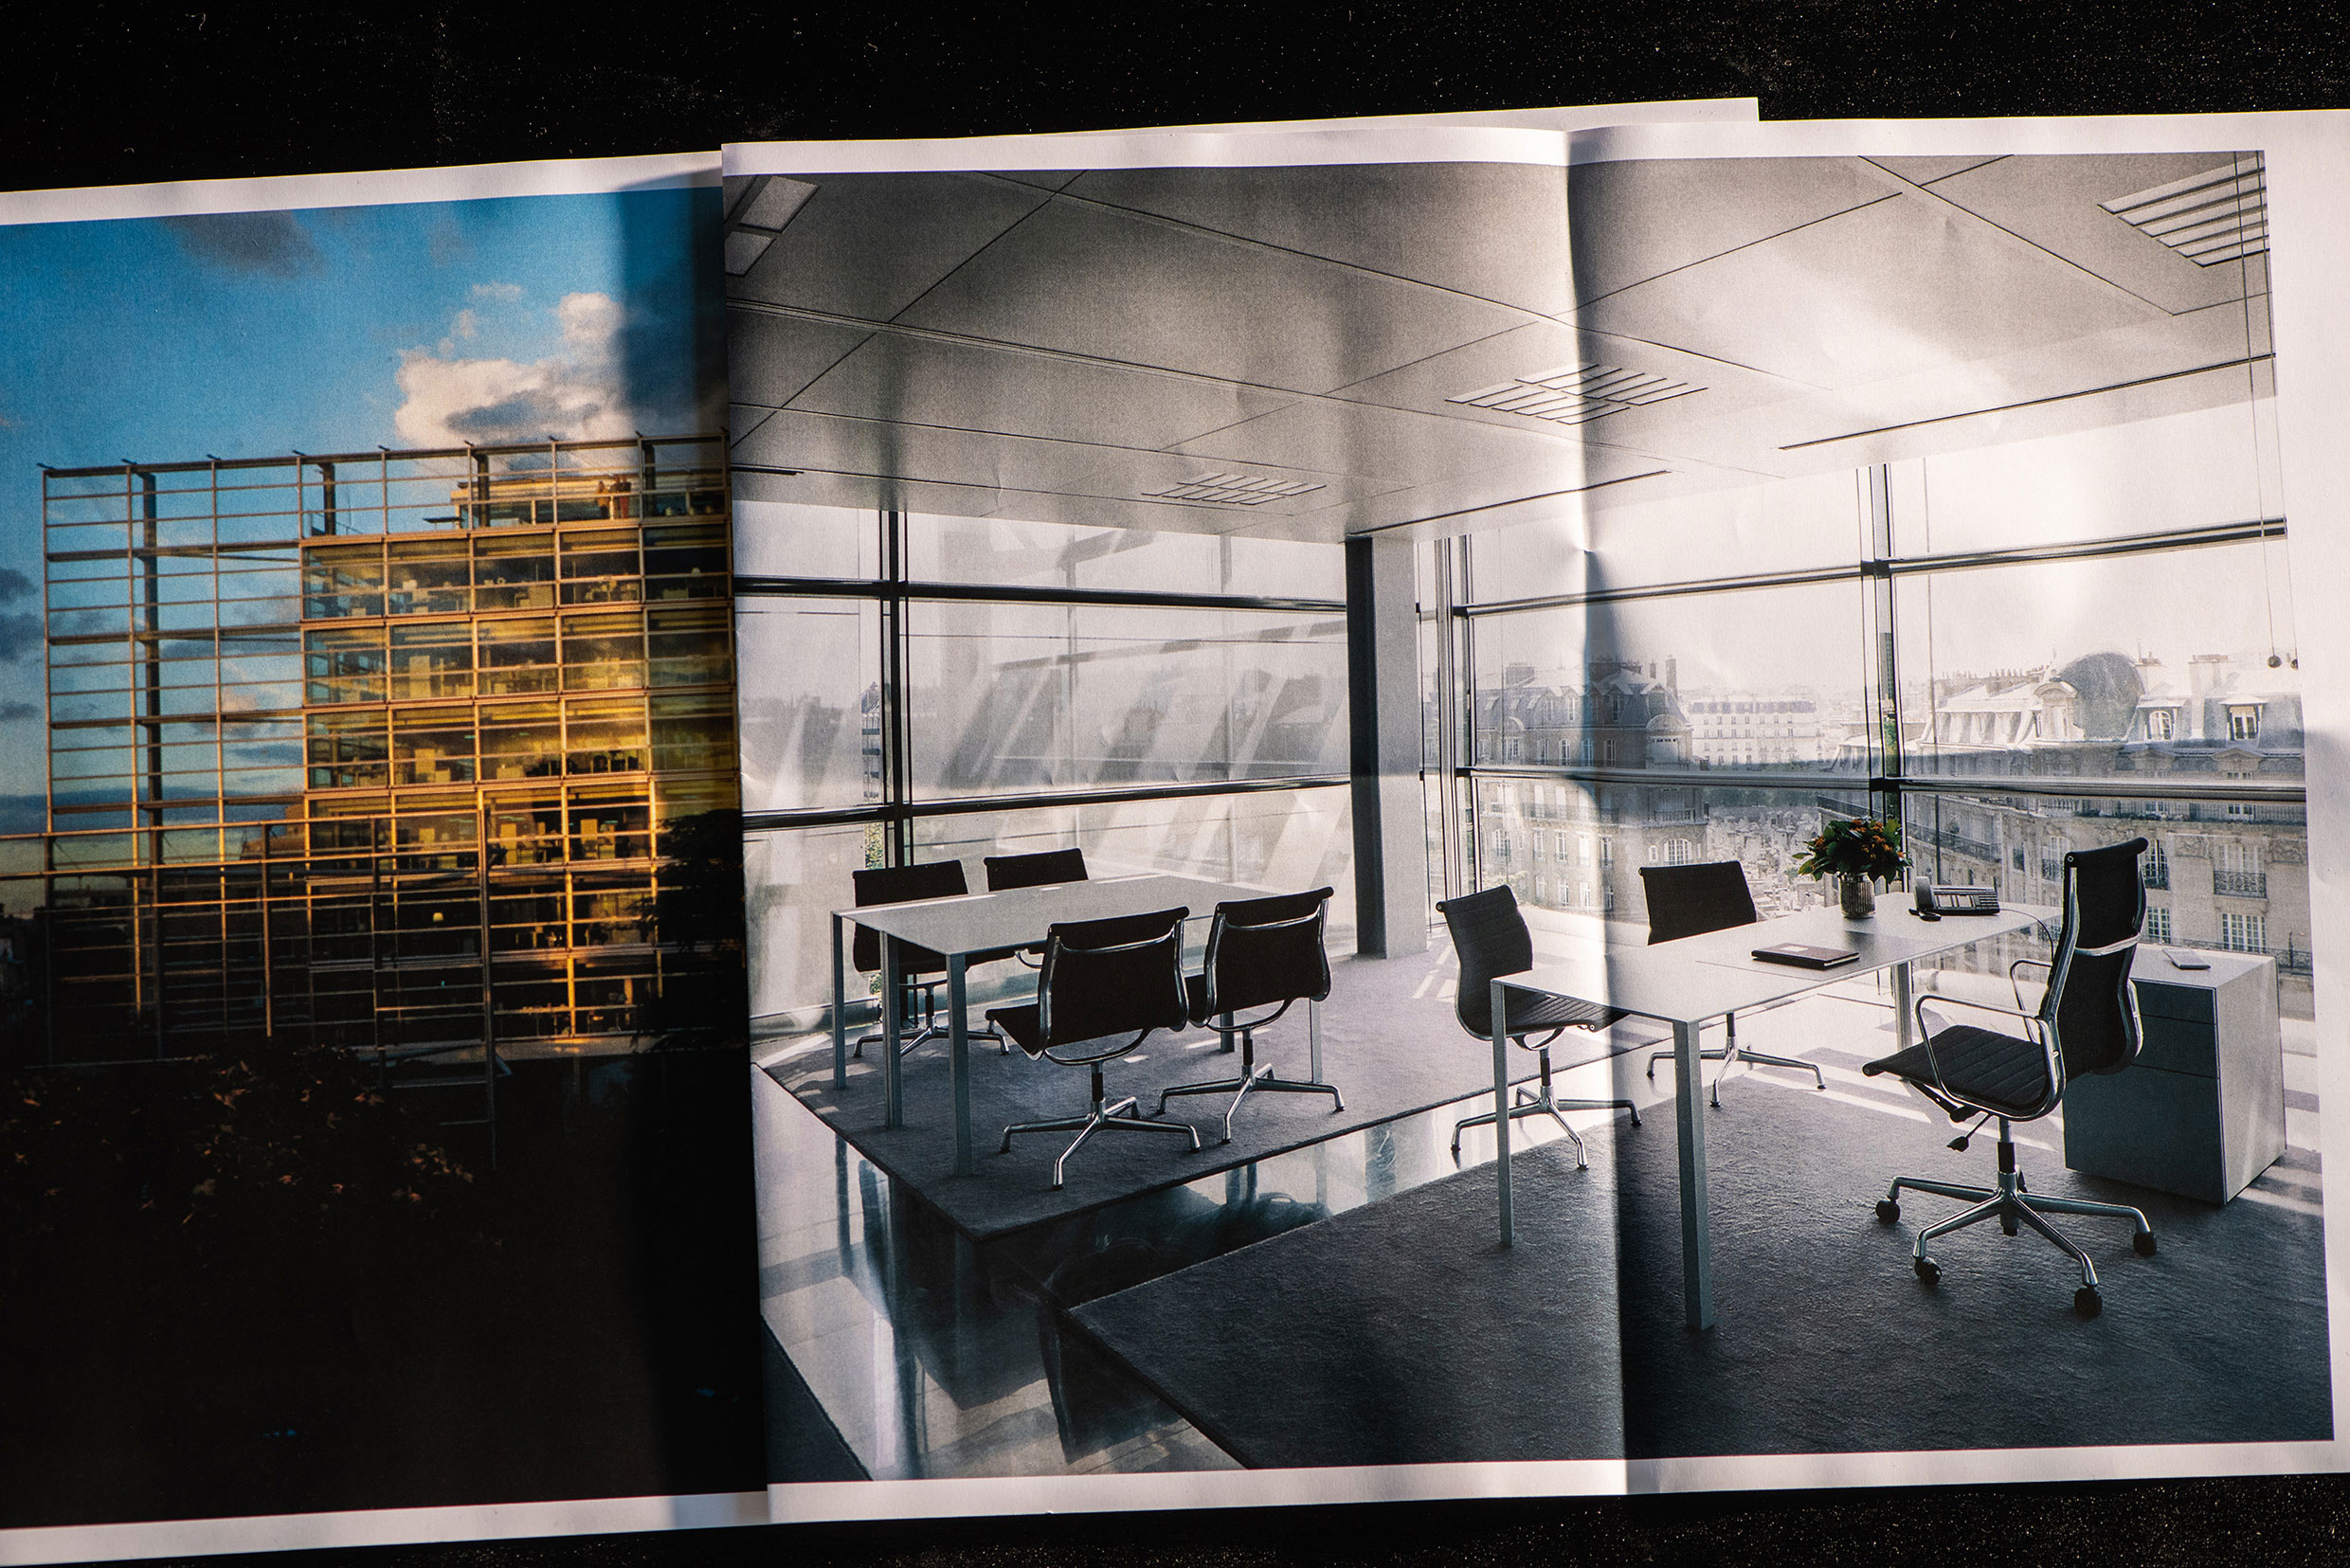 The Fondation Cartier in Paris featuring the Less table, both design by Jean Nouvel for UniFor. Ph. Jeff Burton, from Molteni Mondo by Rizzoli NY, 2024